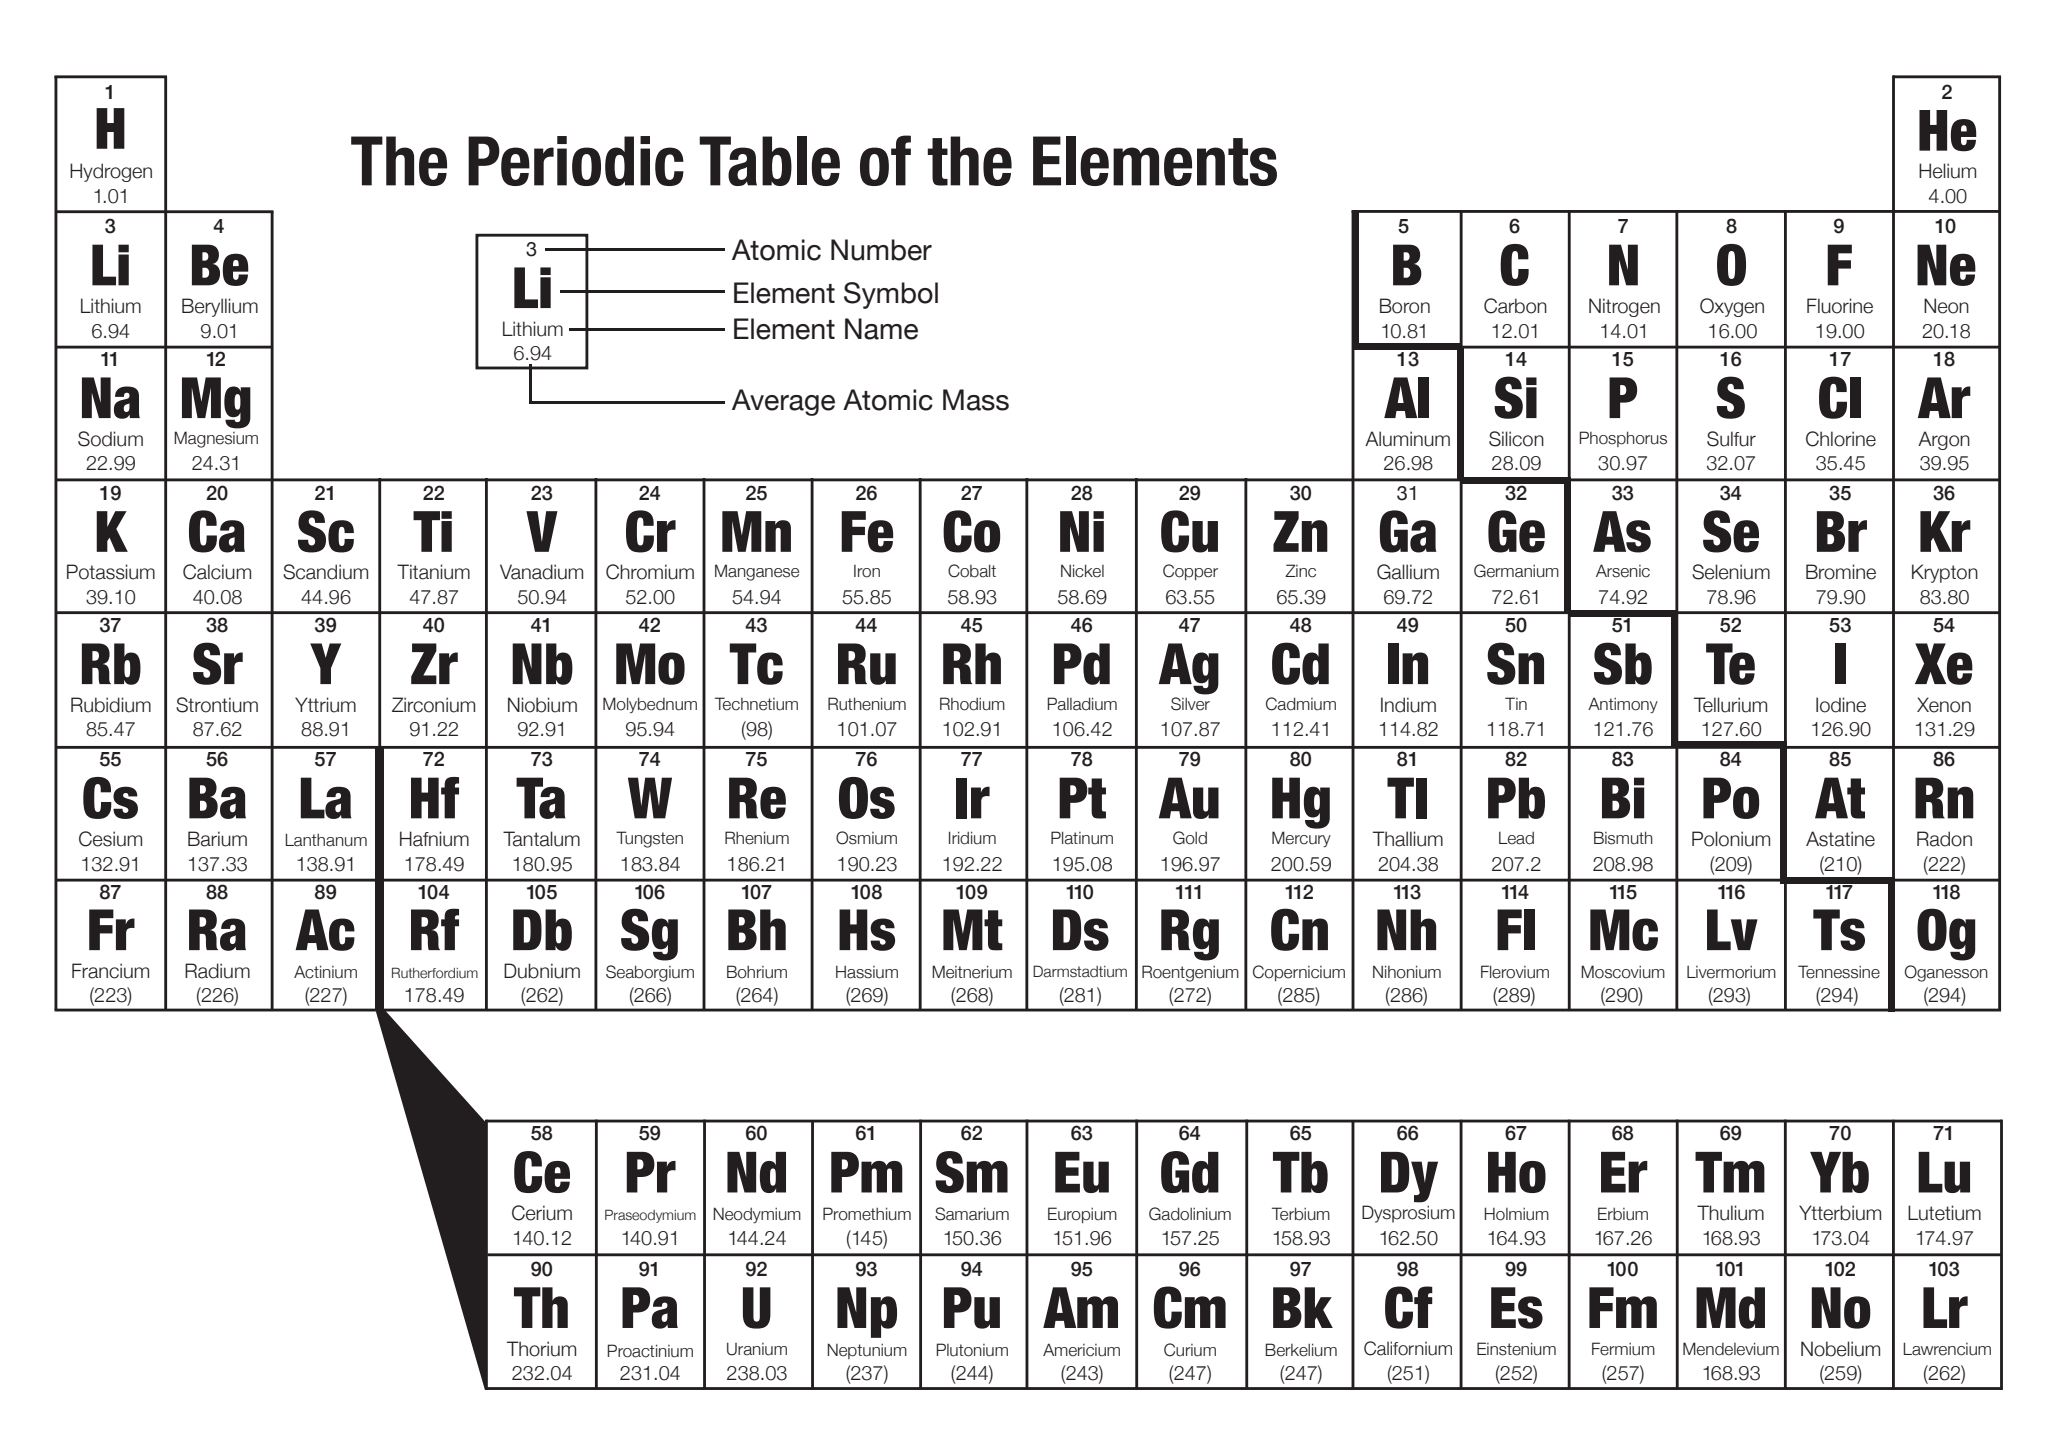 https://www.acs.org/content/dam/acsorg/msc/images/chapter-4/lesson-2/PeriodicTable_full.png